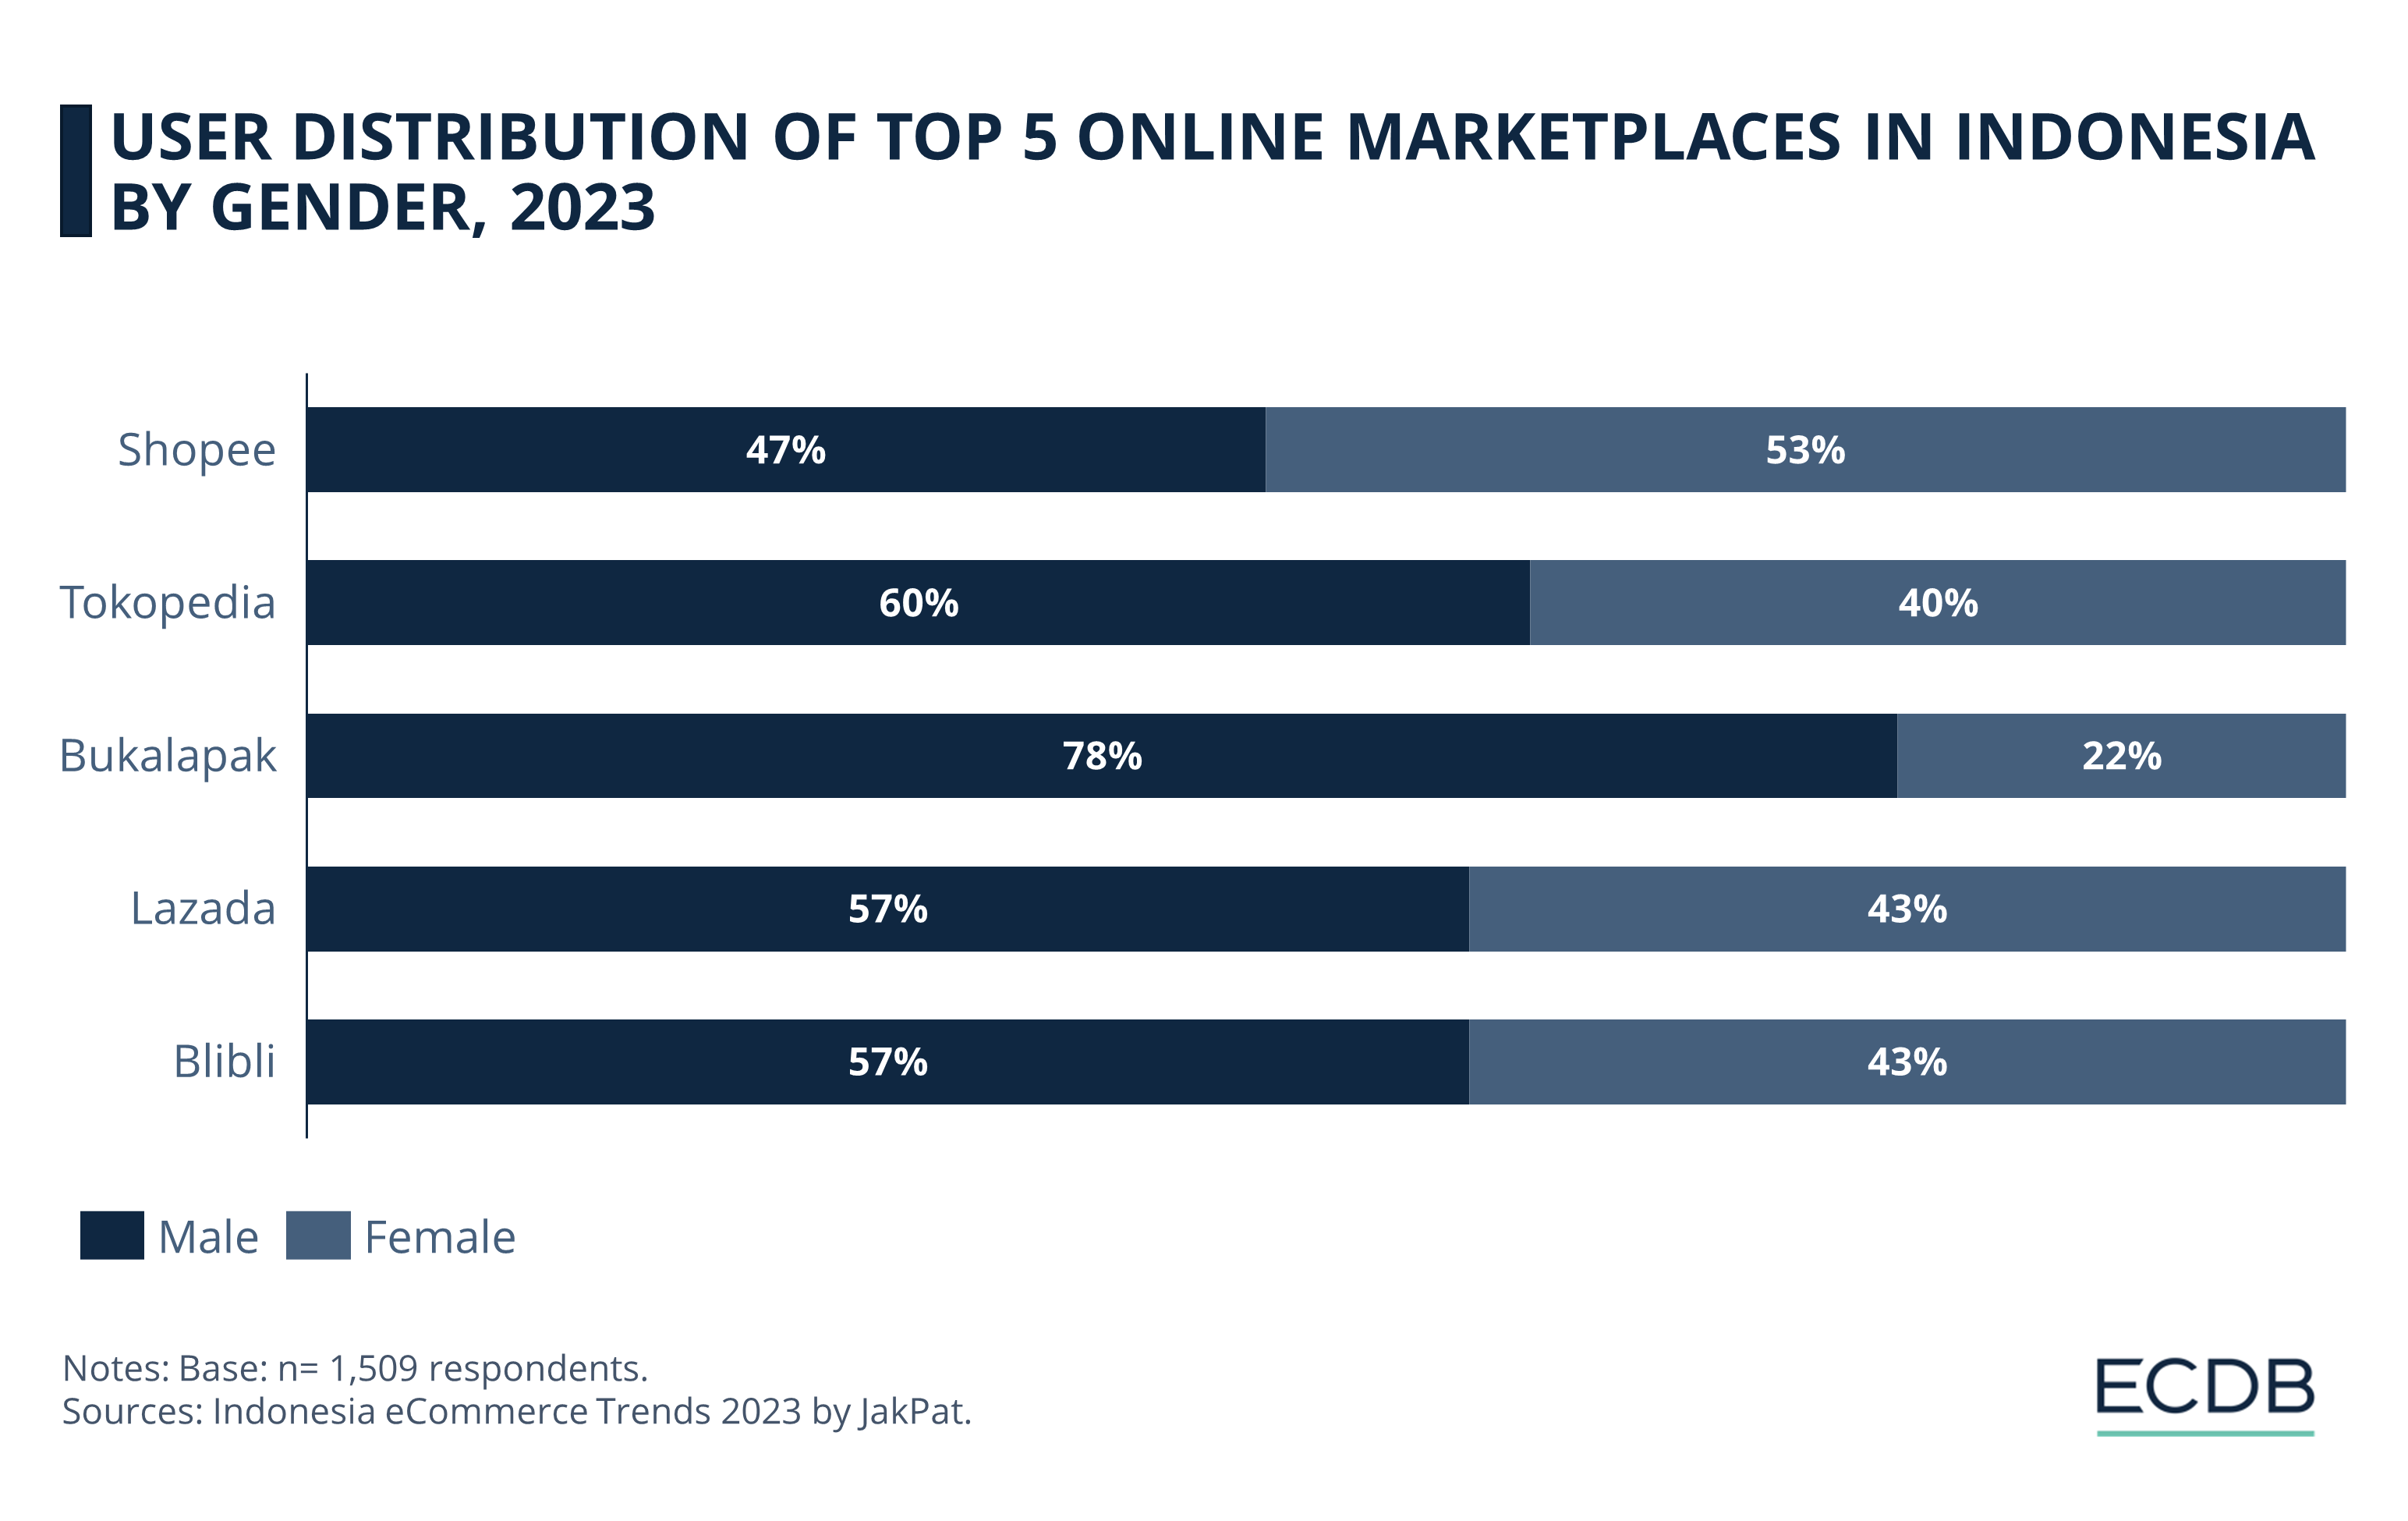 User Distribution of Top 5 Online Marketplaces in Indonesia by Gender, 2023